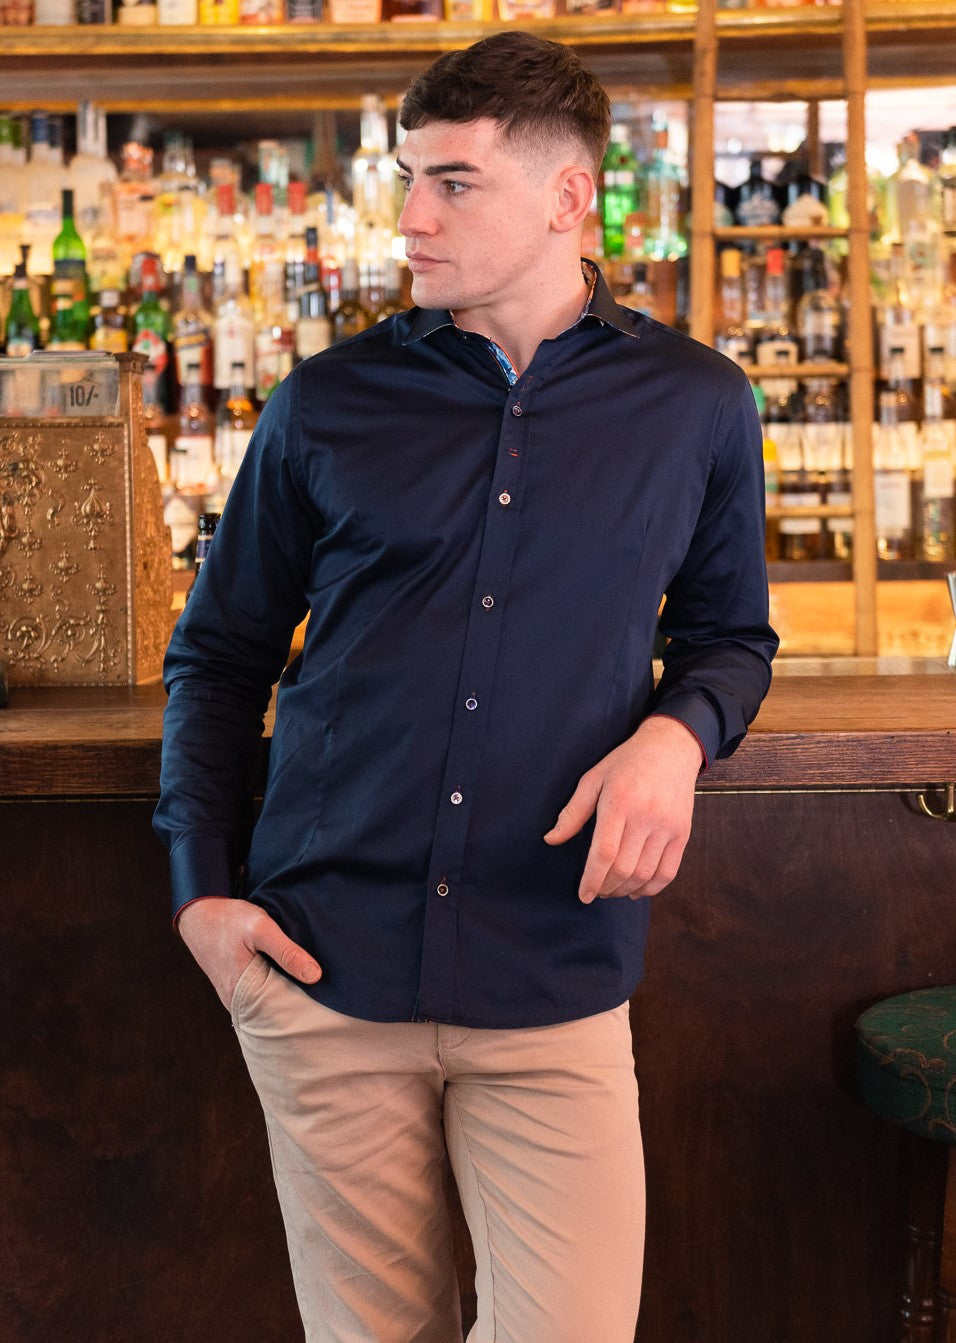 Image of a man wearing a navy blue long sleeve shirt and beige pants, standing in a casual pose at a bar. He appears relaxed and comfortable, with a slight smile on his face. Get inspired by Guide London's premium clothing collection for men's fashion.